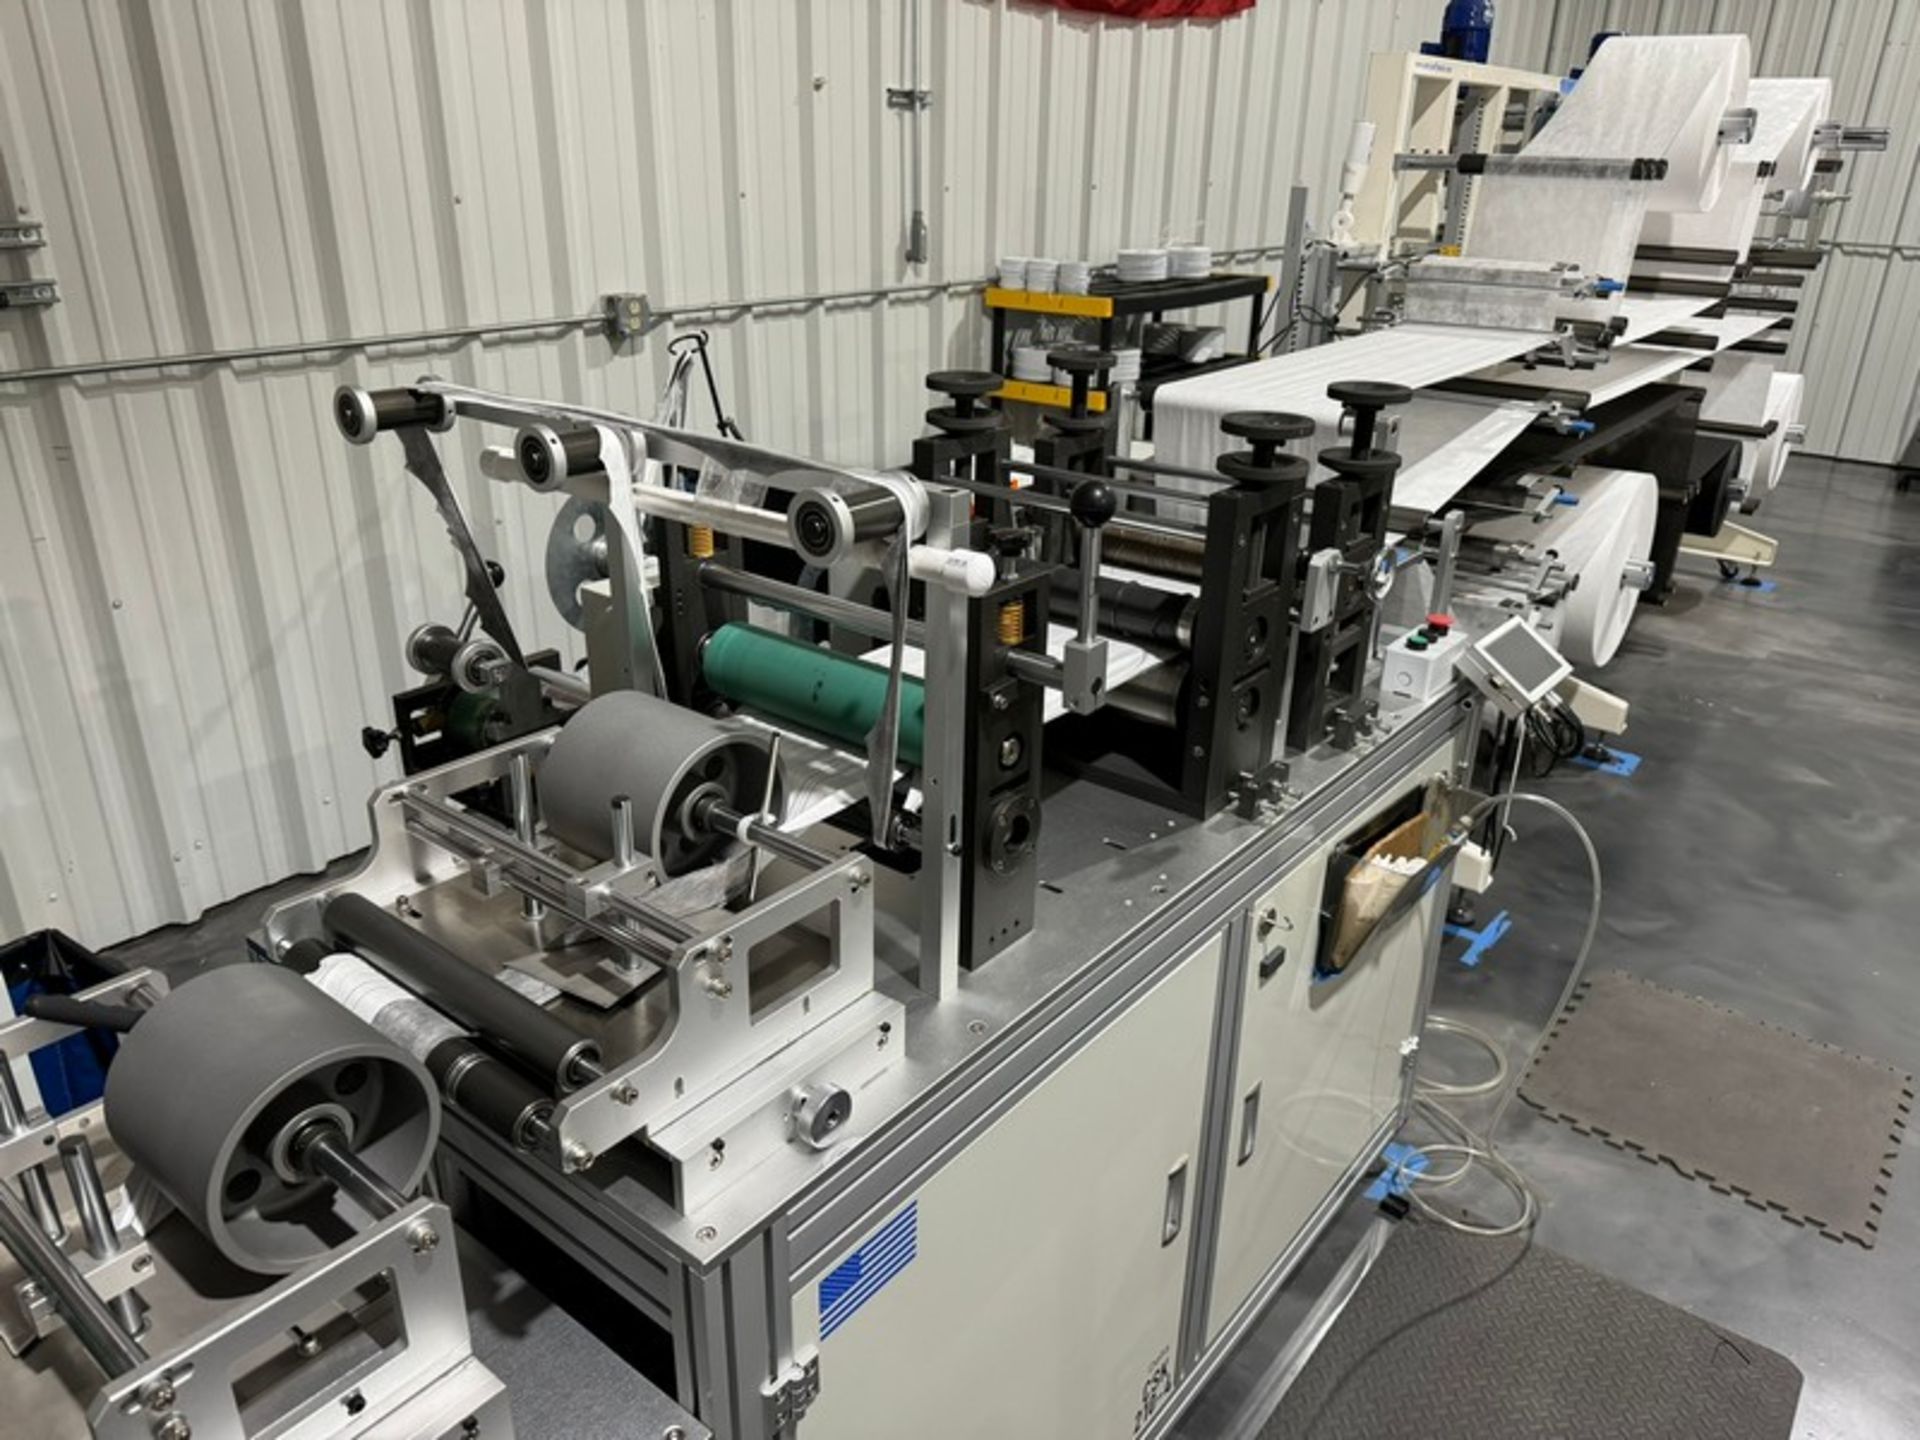 2022 KYD Automatic 4,000 Units Per Hour Mask Manufacturing Line, Includes Unwinding Station, Rolling - Image 4 of 14